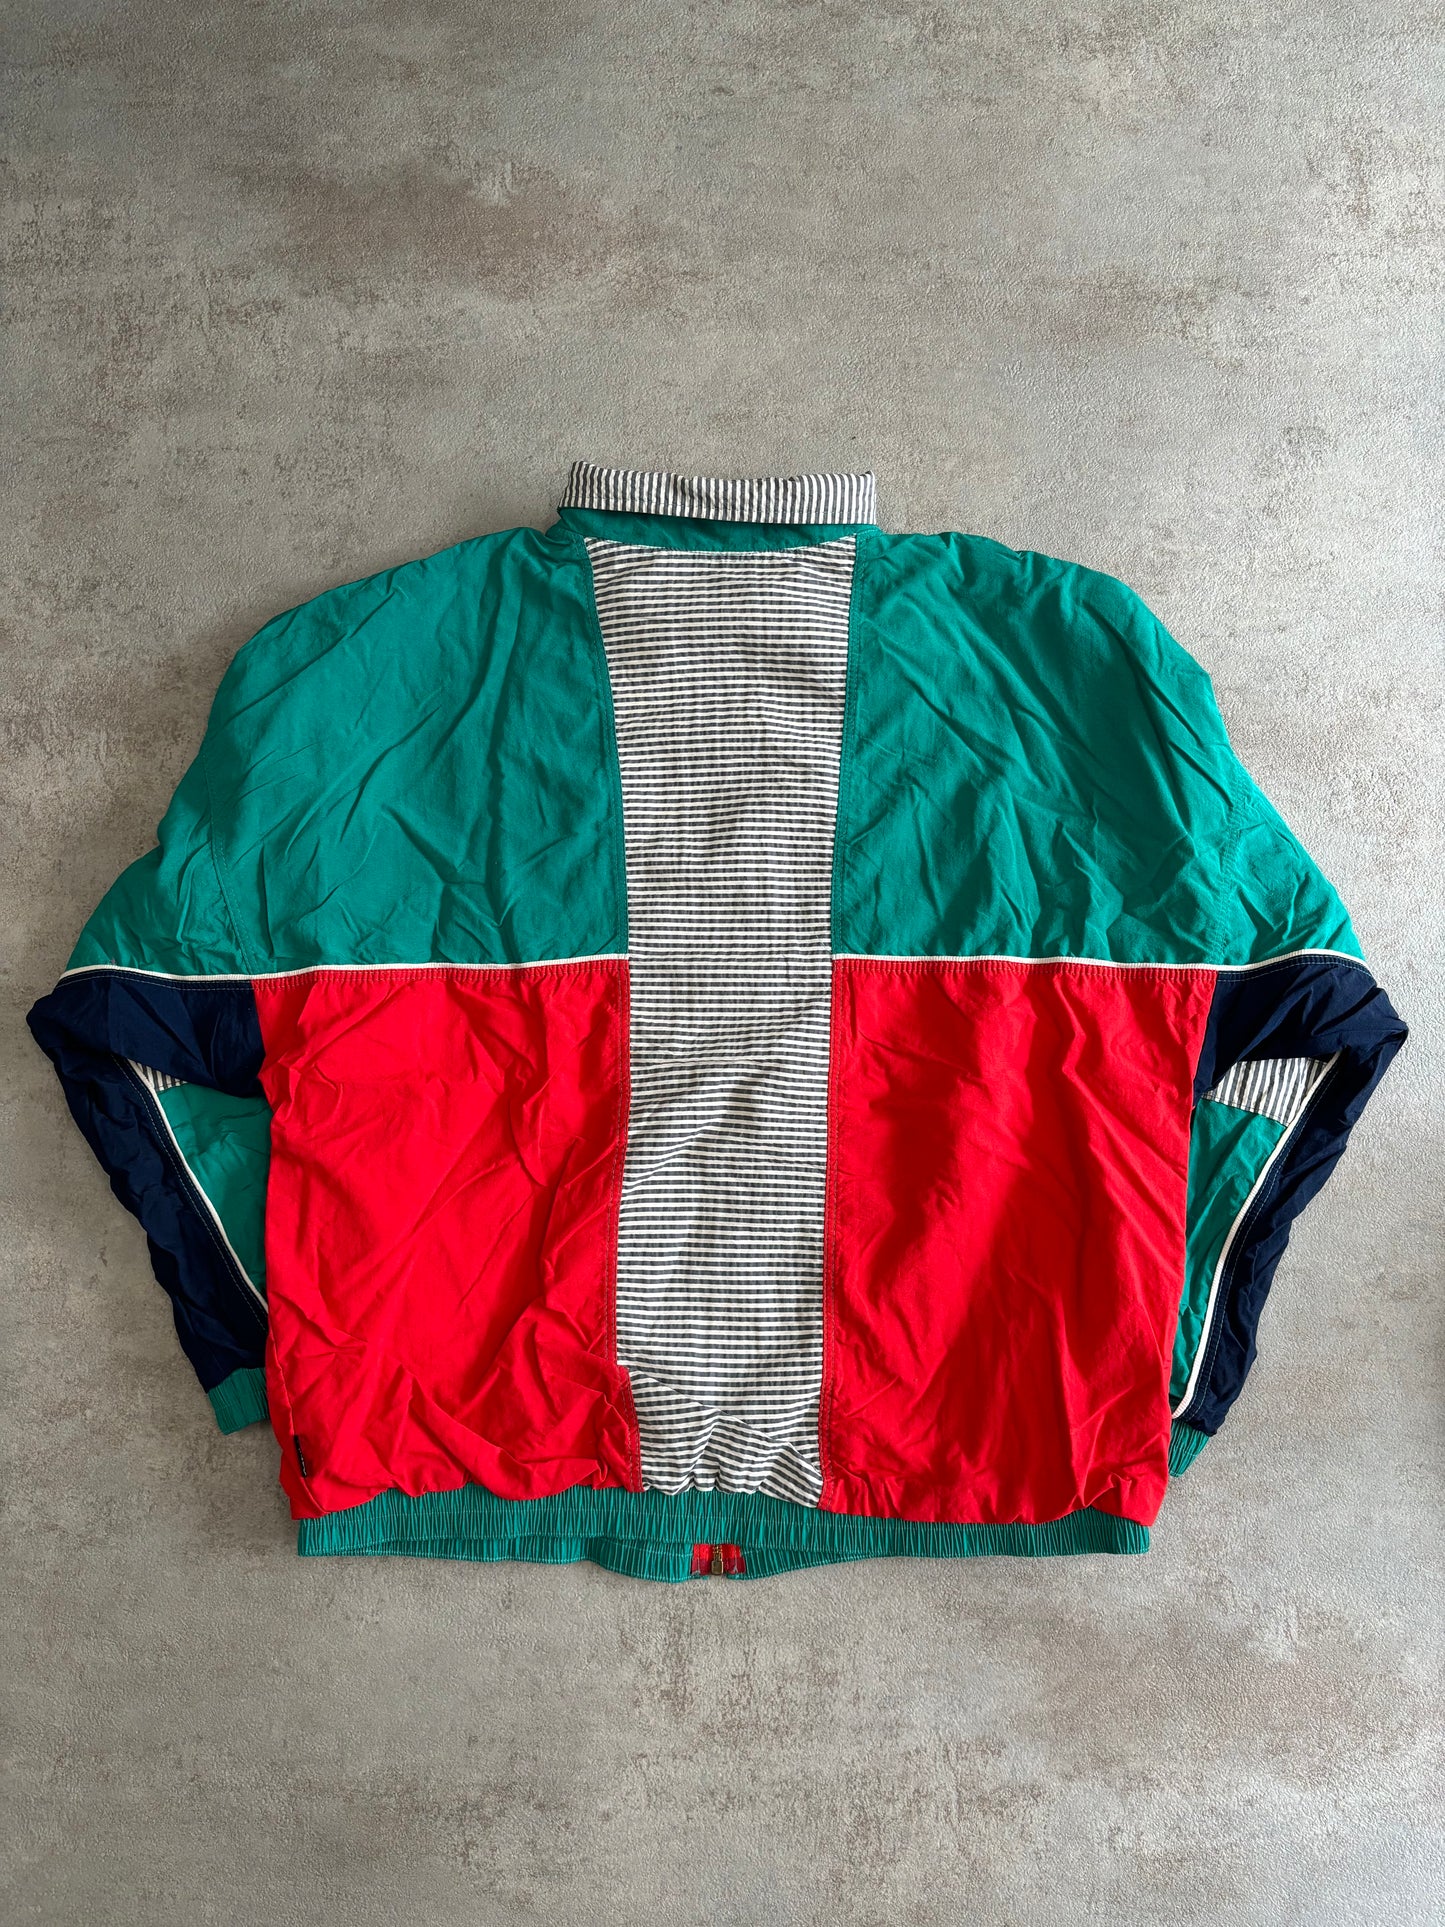 Track Sport Jacket 'Made In West Germany' 80s - M